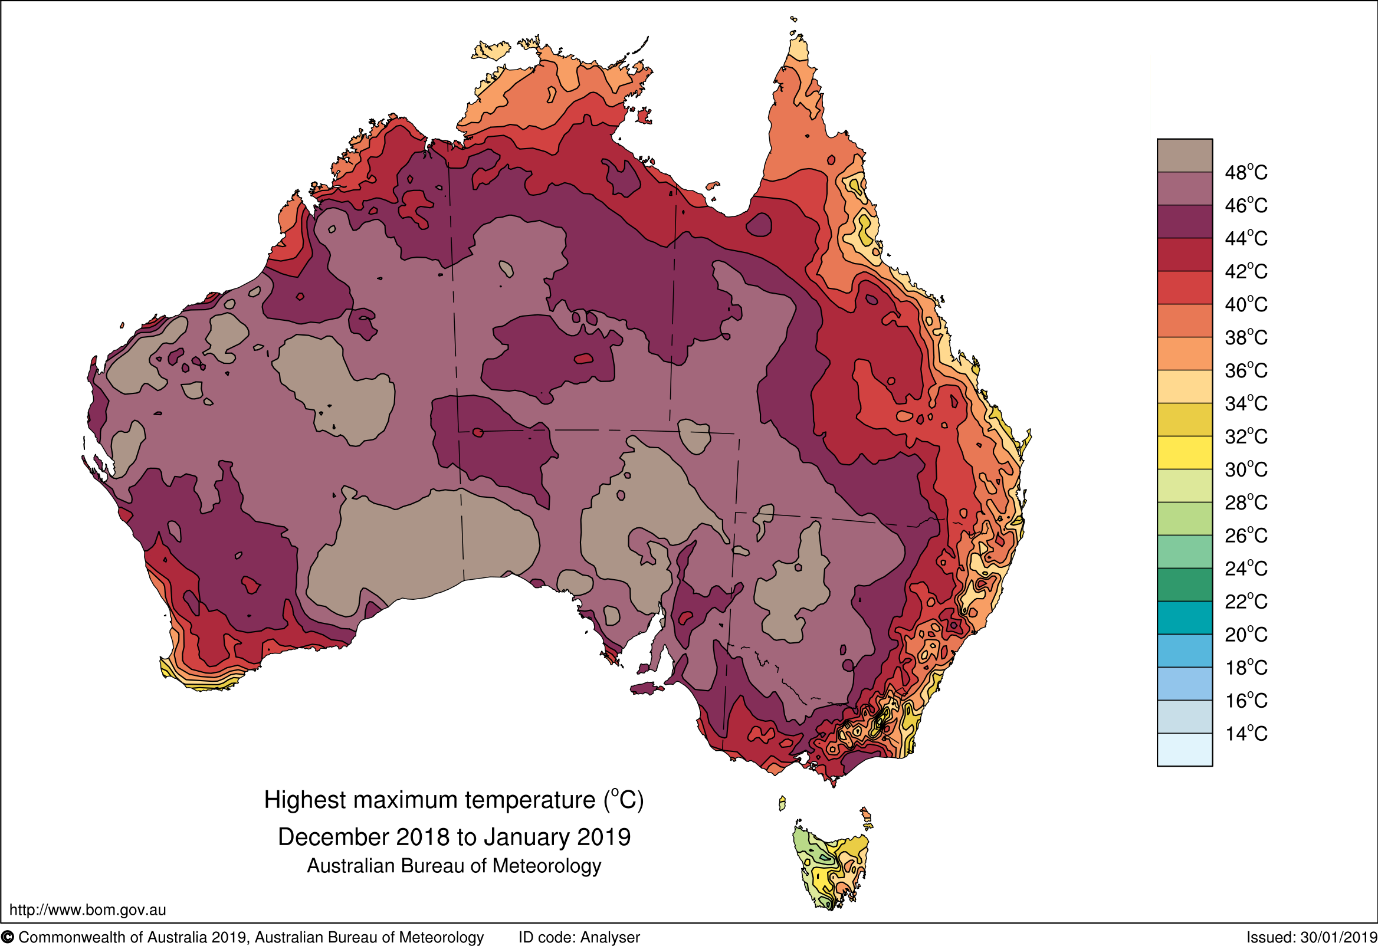 Map of Australia showing December–January highest maximum temperatures. The great majority of the map is brown or purple, indicating 44–48 °C, with most of the rest of the country showing as red or orange (36 °C to 42 °C). Only small areas of the east coast, Tasmania and southwest WA were below that.